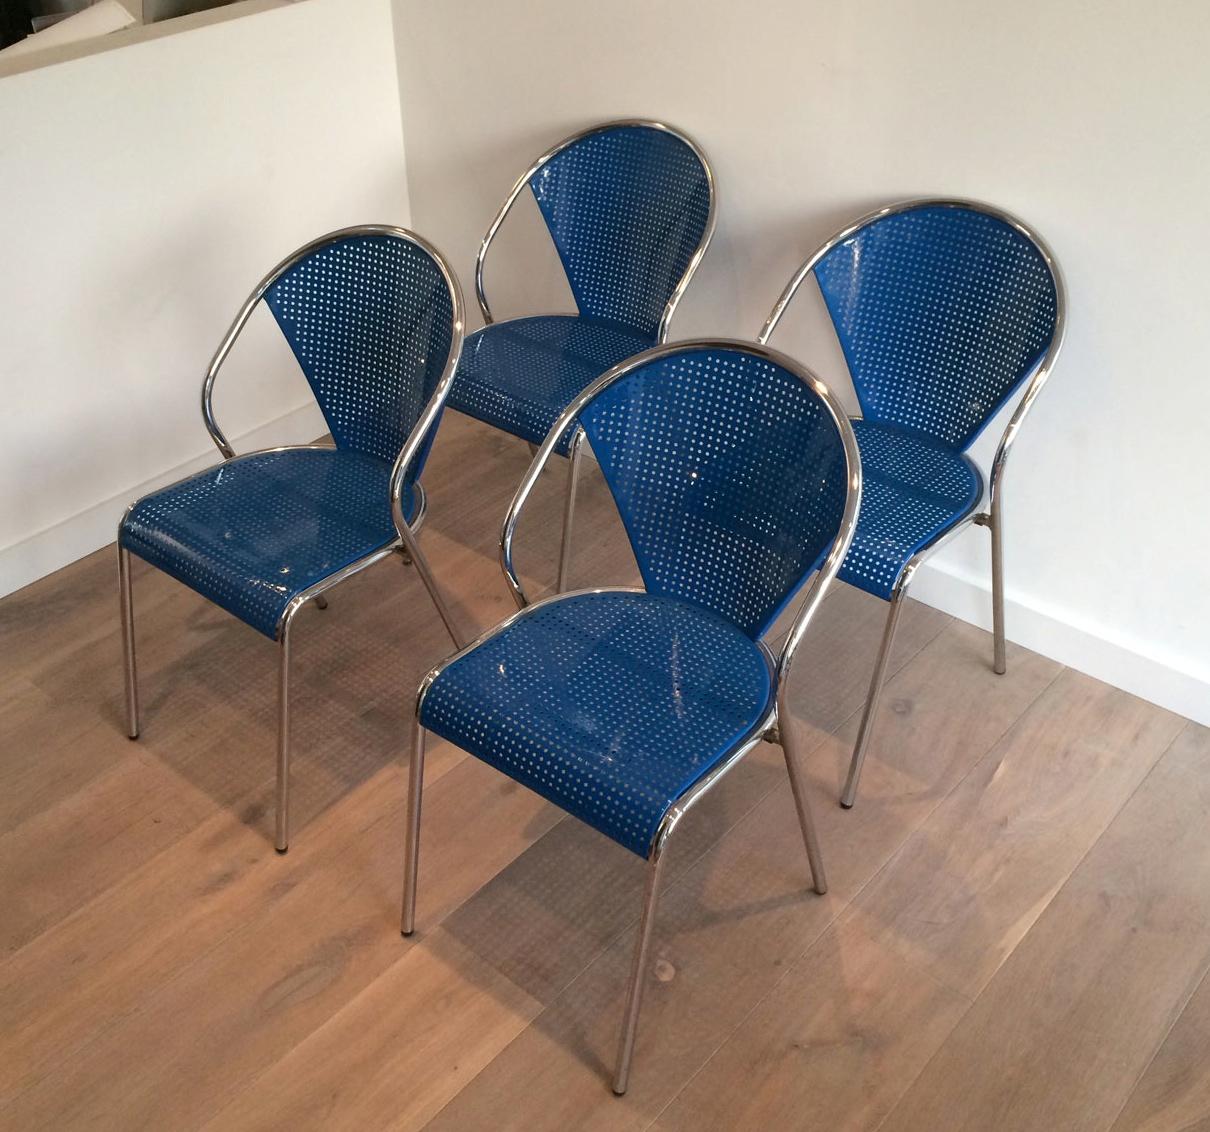 Set of 4 Chrome and Blue Lacquered Perfored Metal Chairs For Sale 2